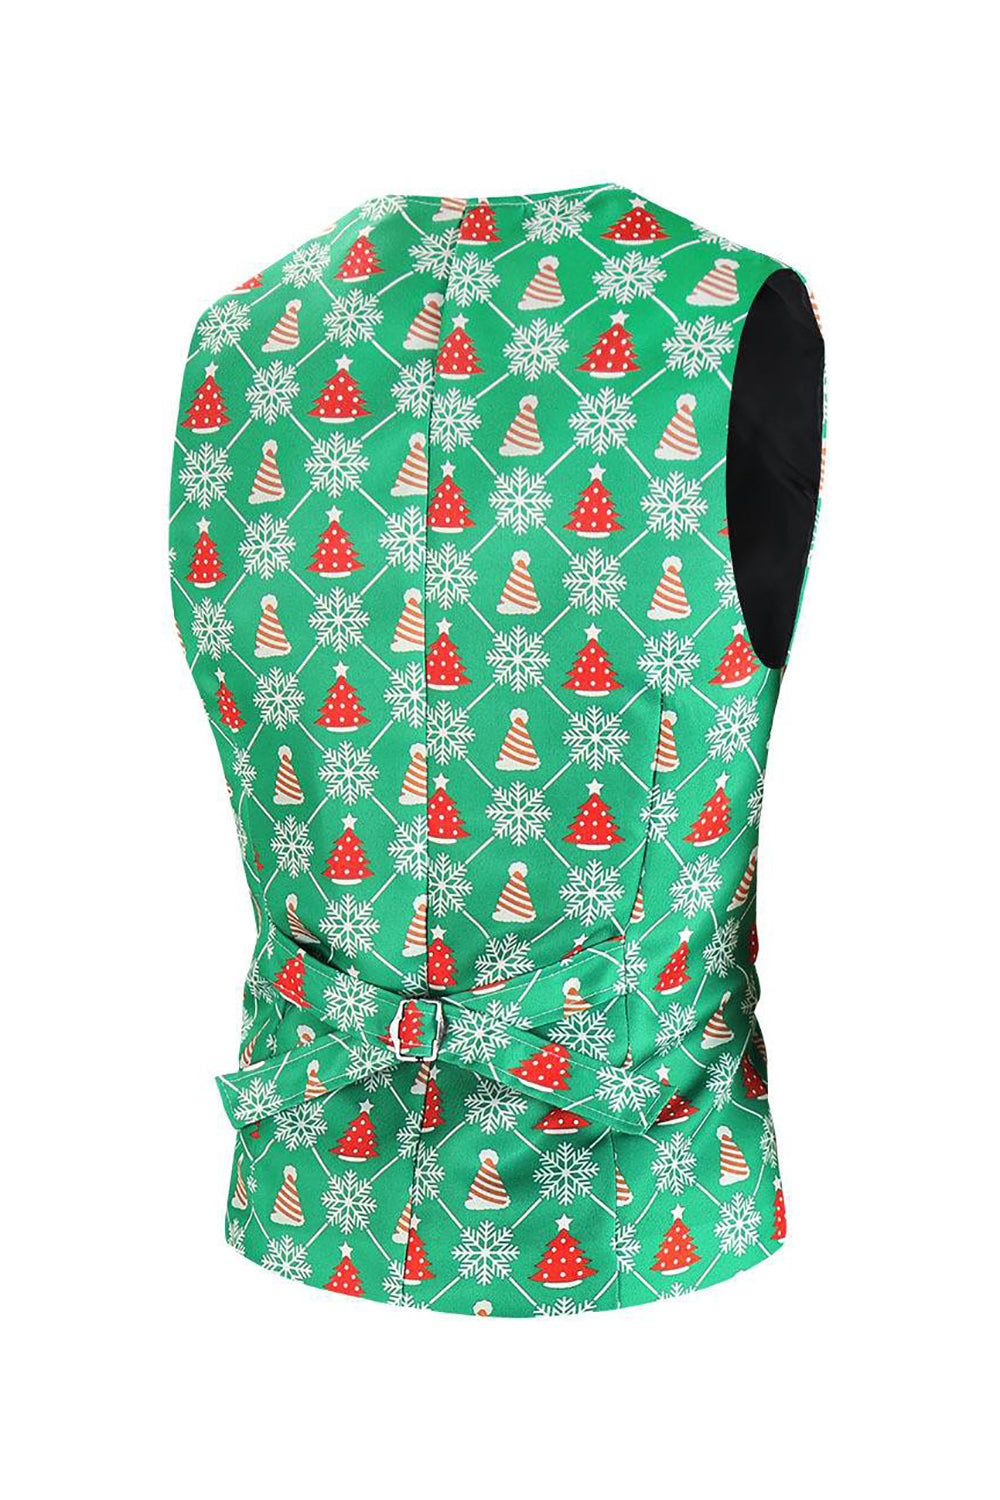 Green Christmas Tree Single Breasted Men's Suit Vest